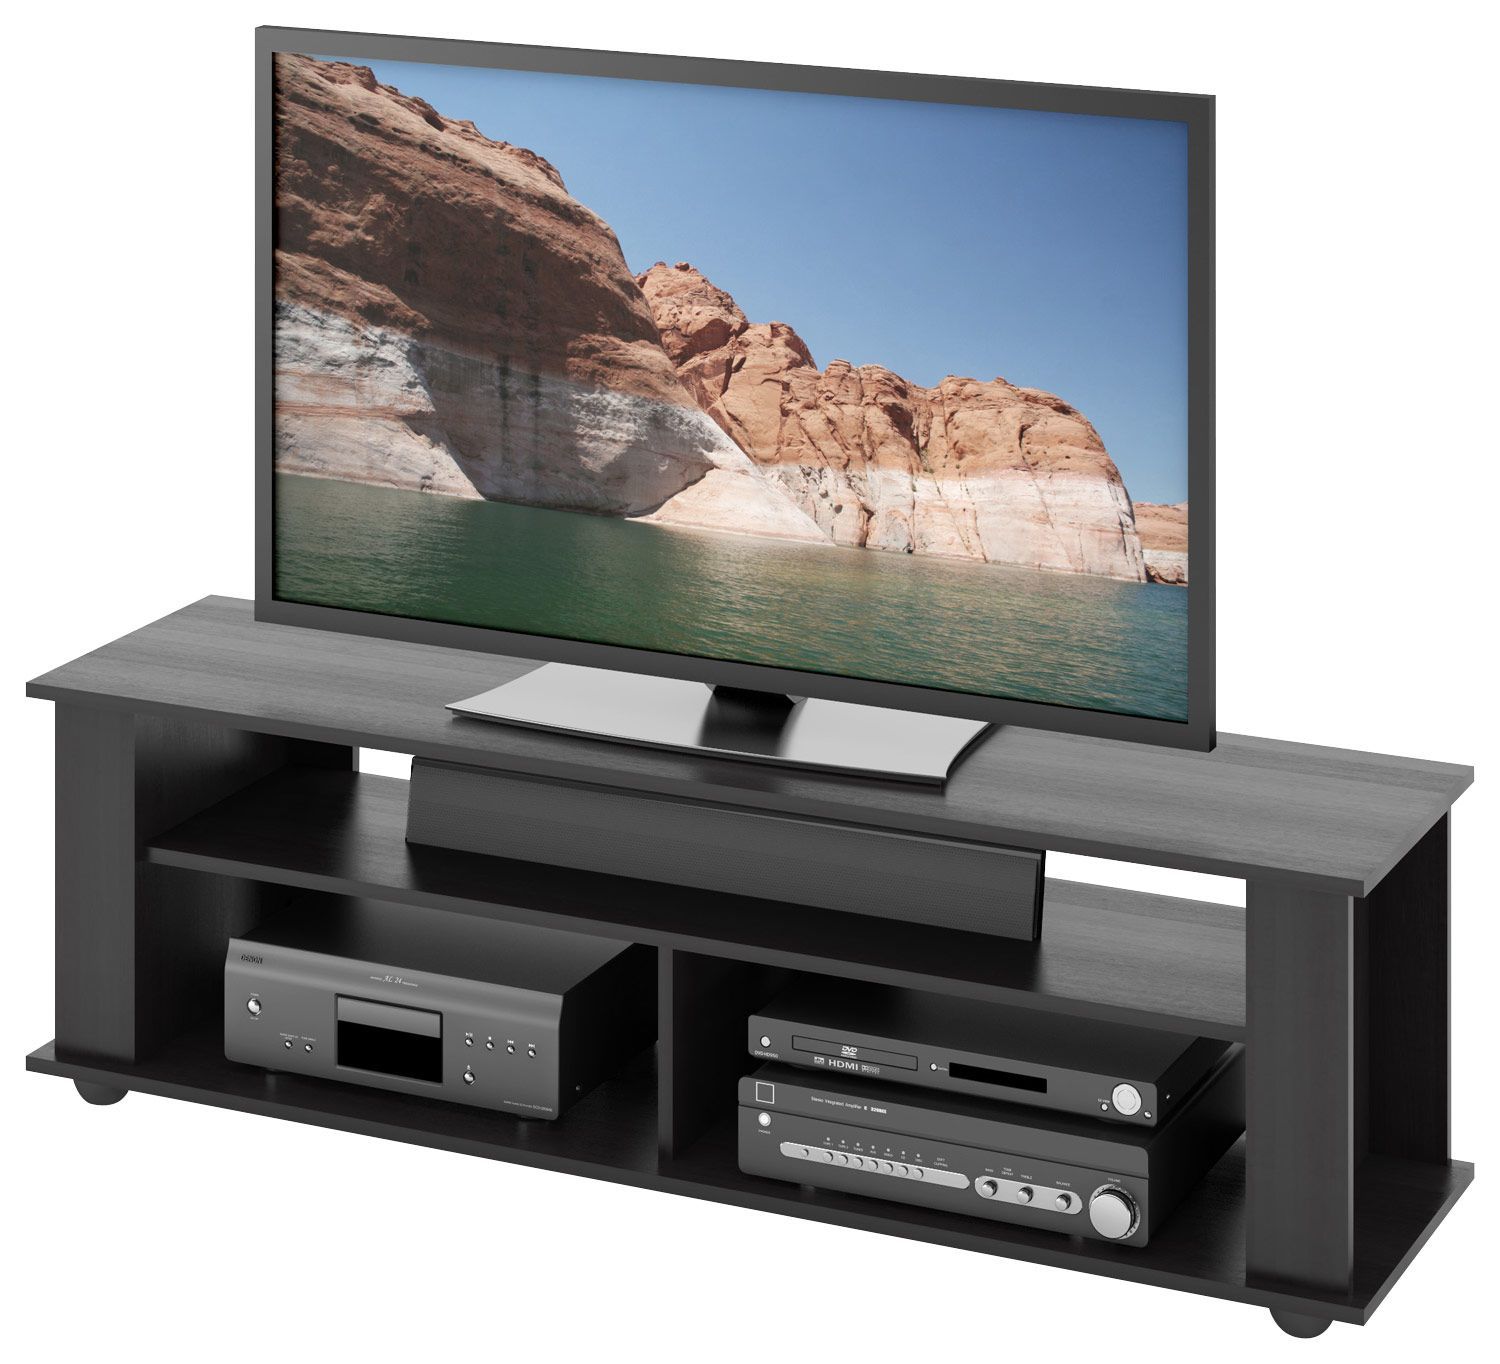 65 Inch Wood Tv Stand | Modern Corner Tv Stand, Flat With Regard To Contemporary Wood Tv Stands (View 10 of 15)